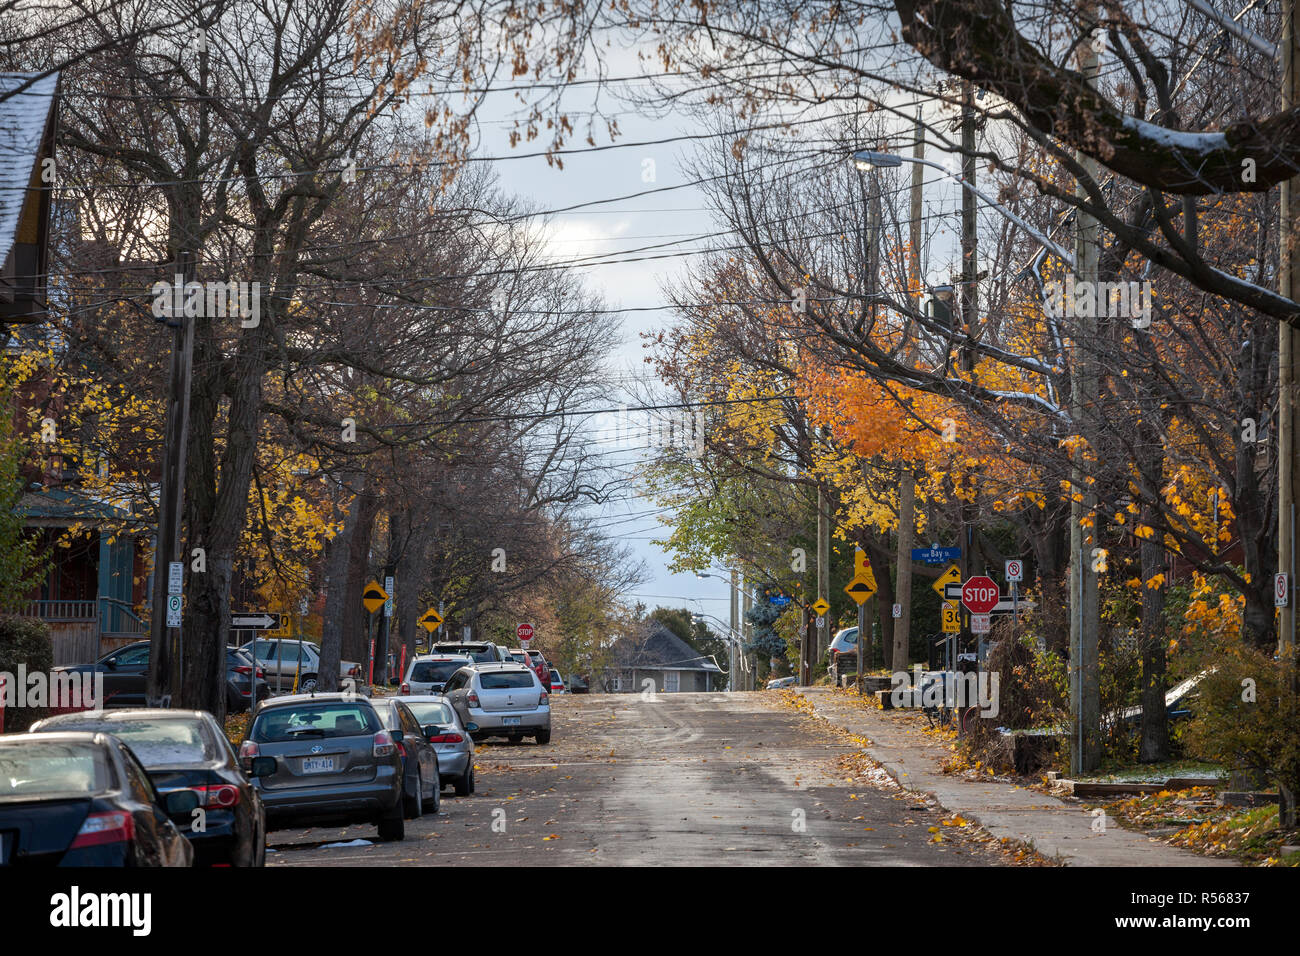 OTTAWA, CANADA - NOVEMBER 10, 2018: Typical north American residential street in autumn in Centretown, Ottawa, Ontario, during an autumn afternoon, wi Stock Photo